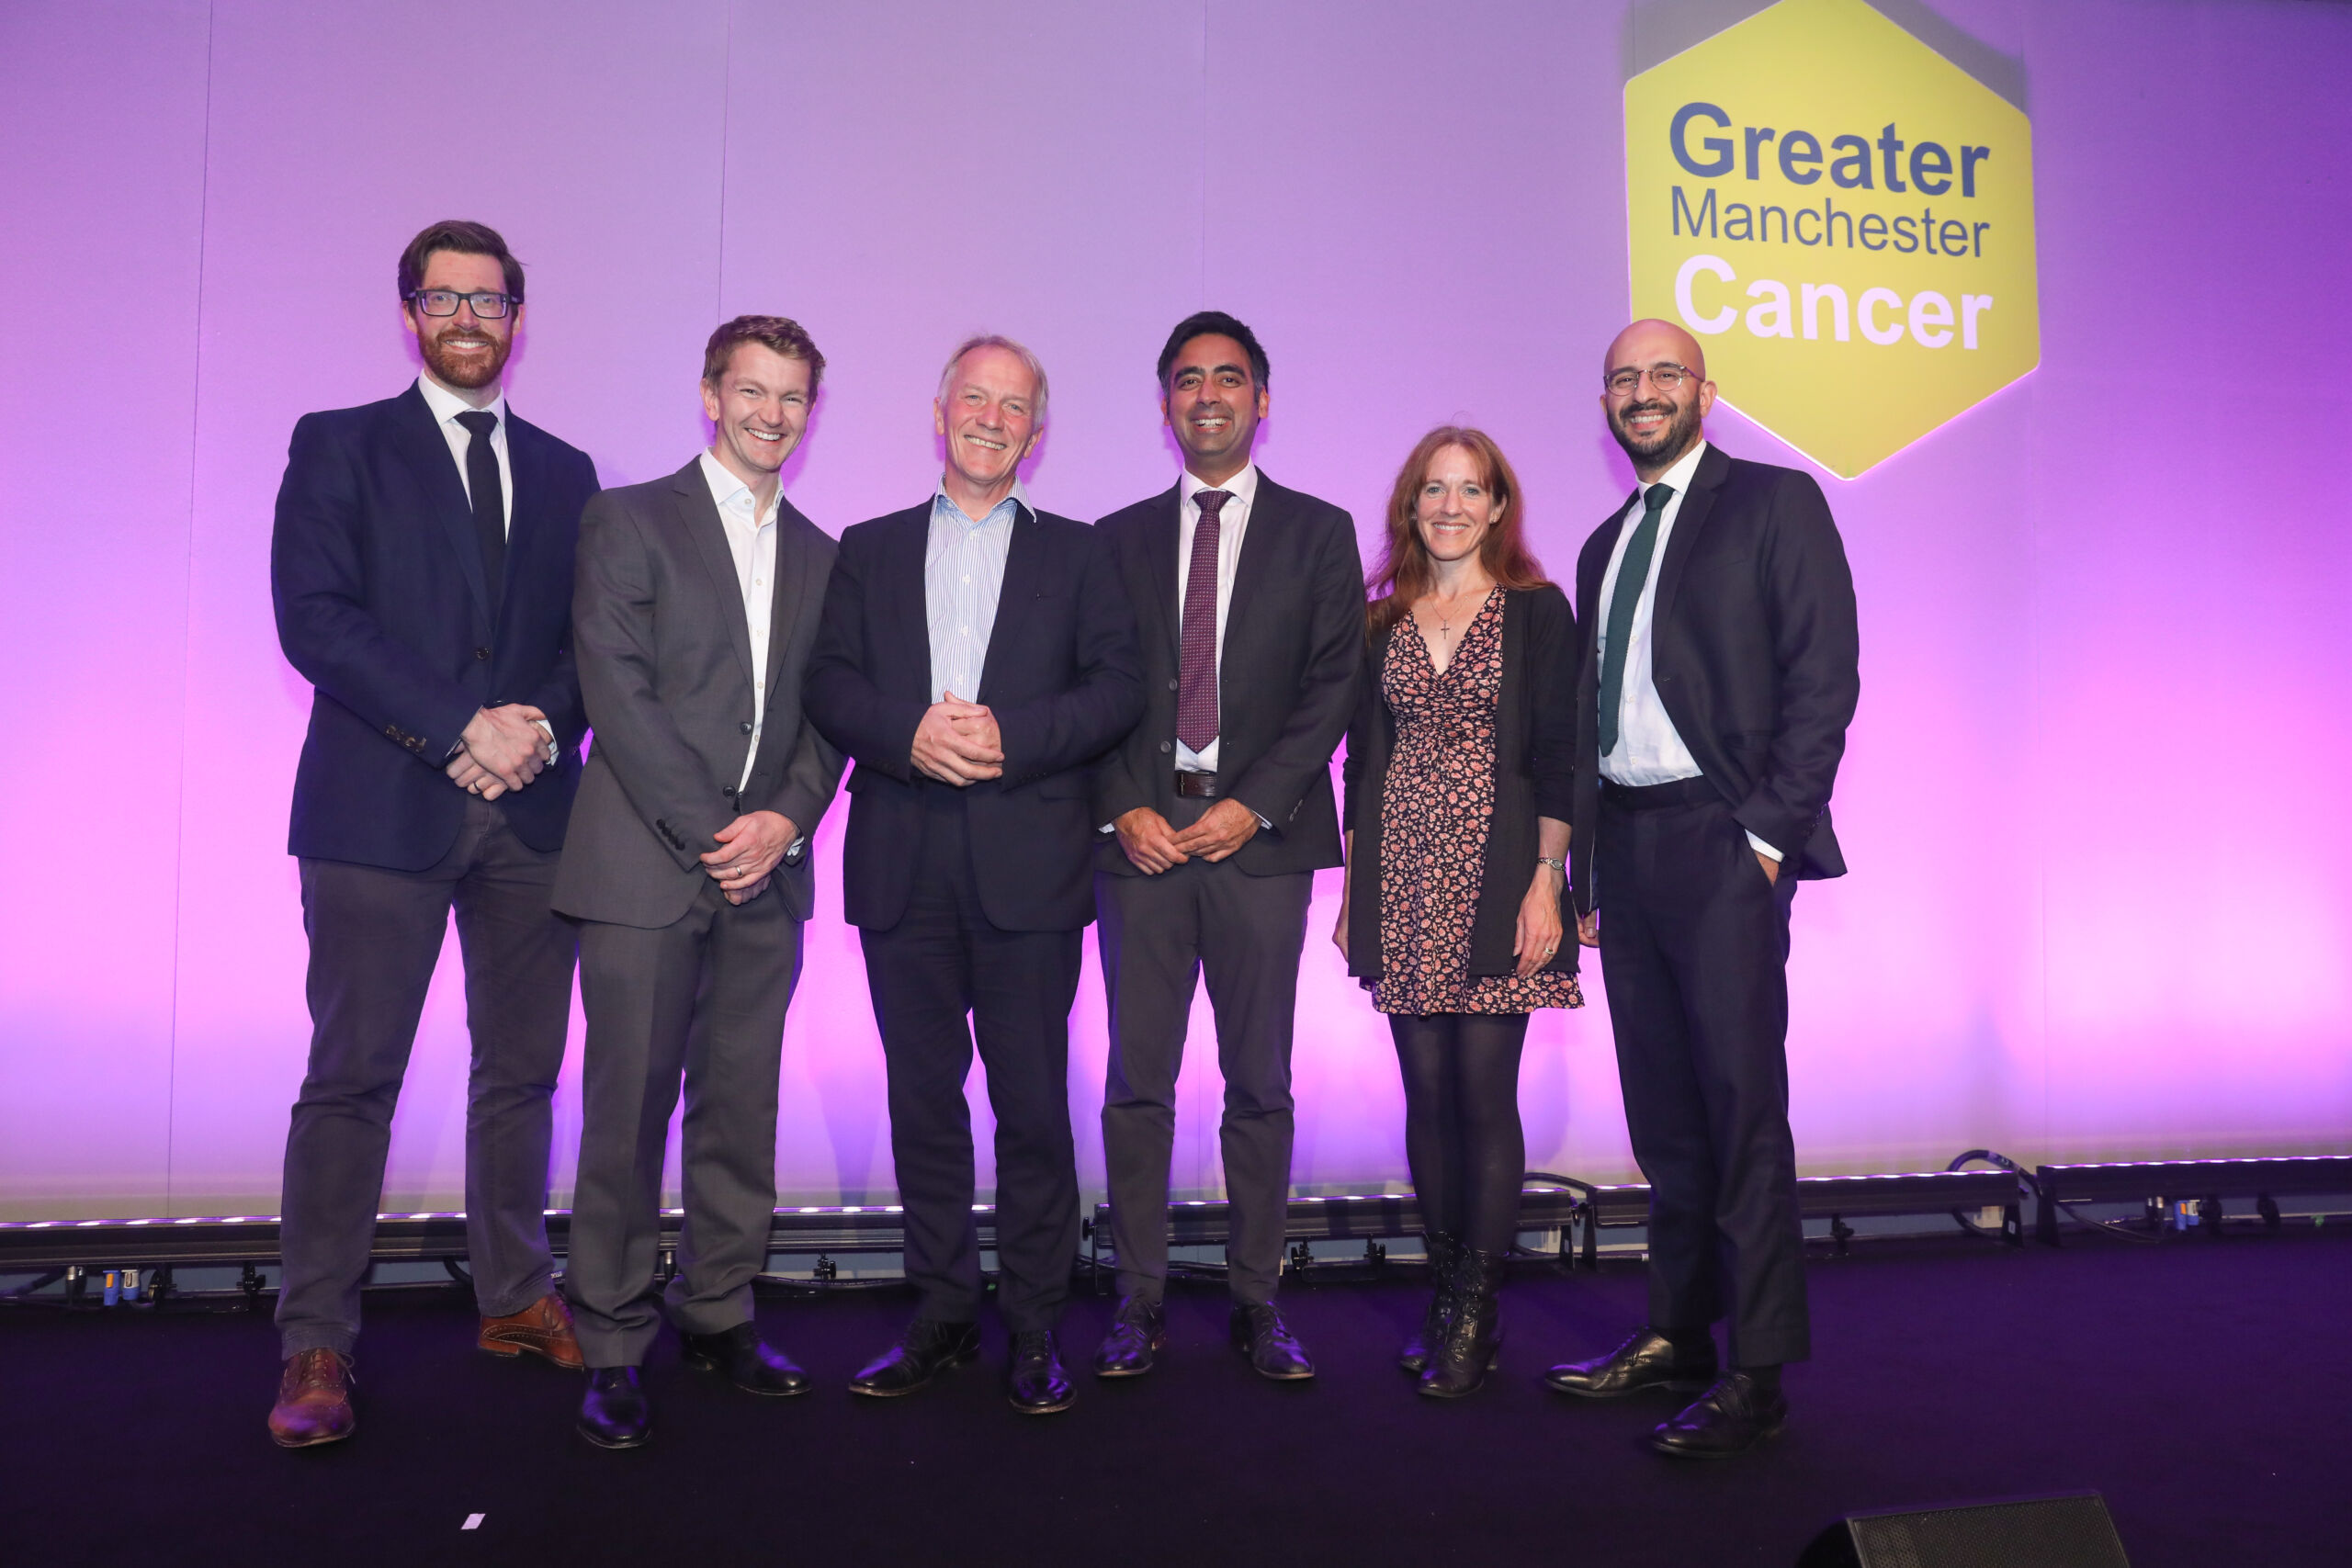 Guests at the GM Cancer Awards pose on stage